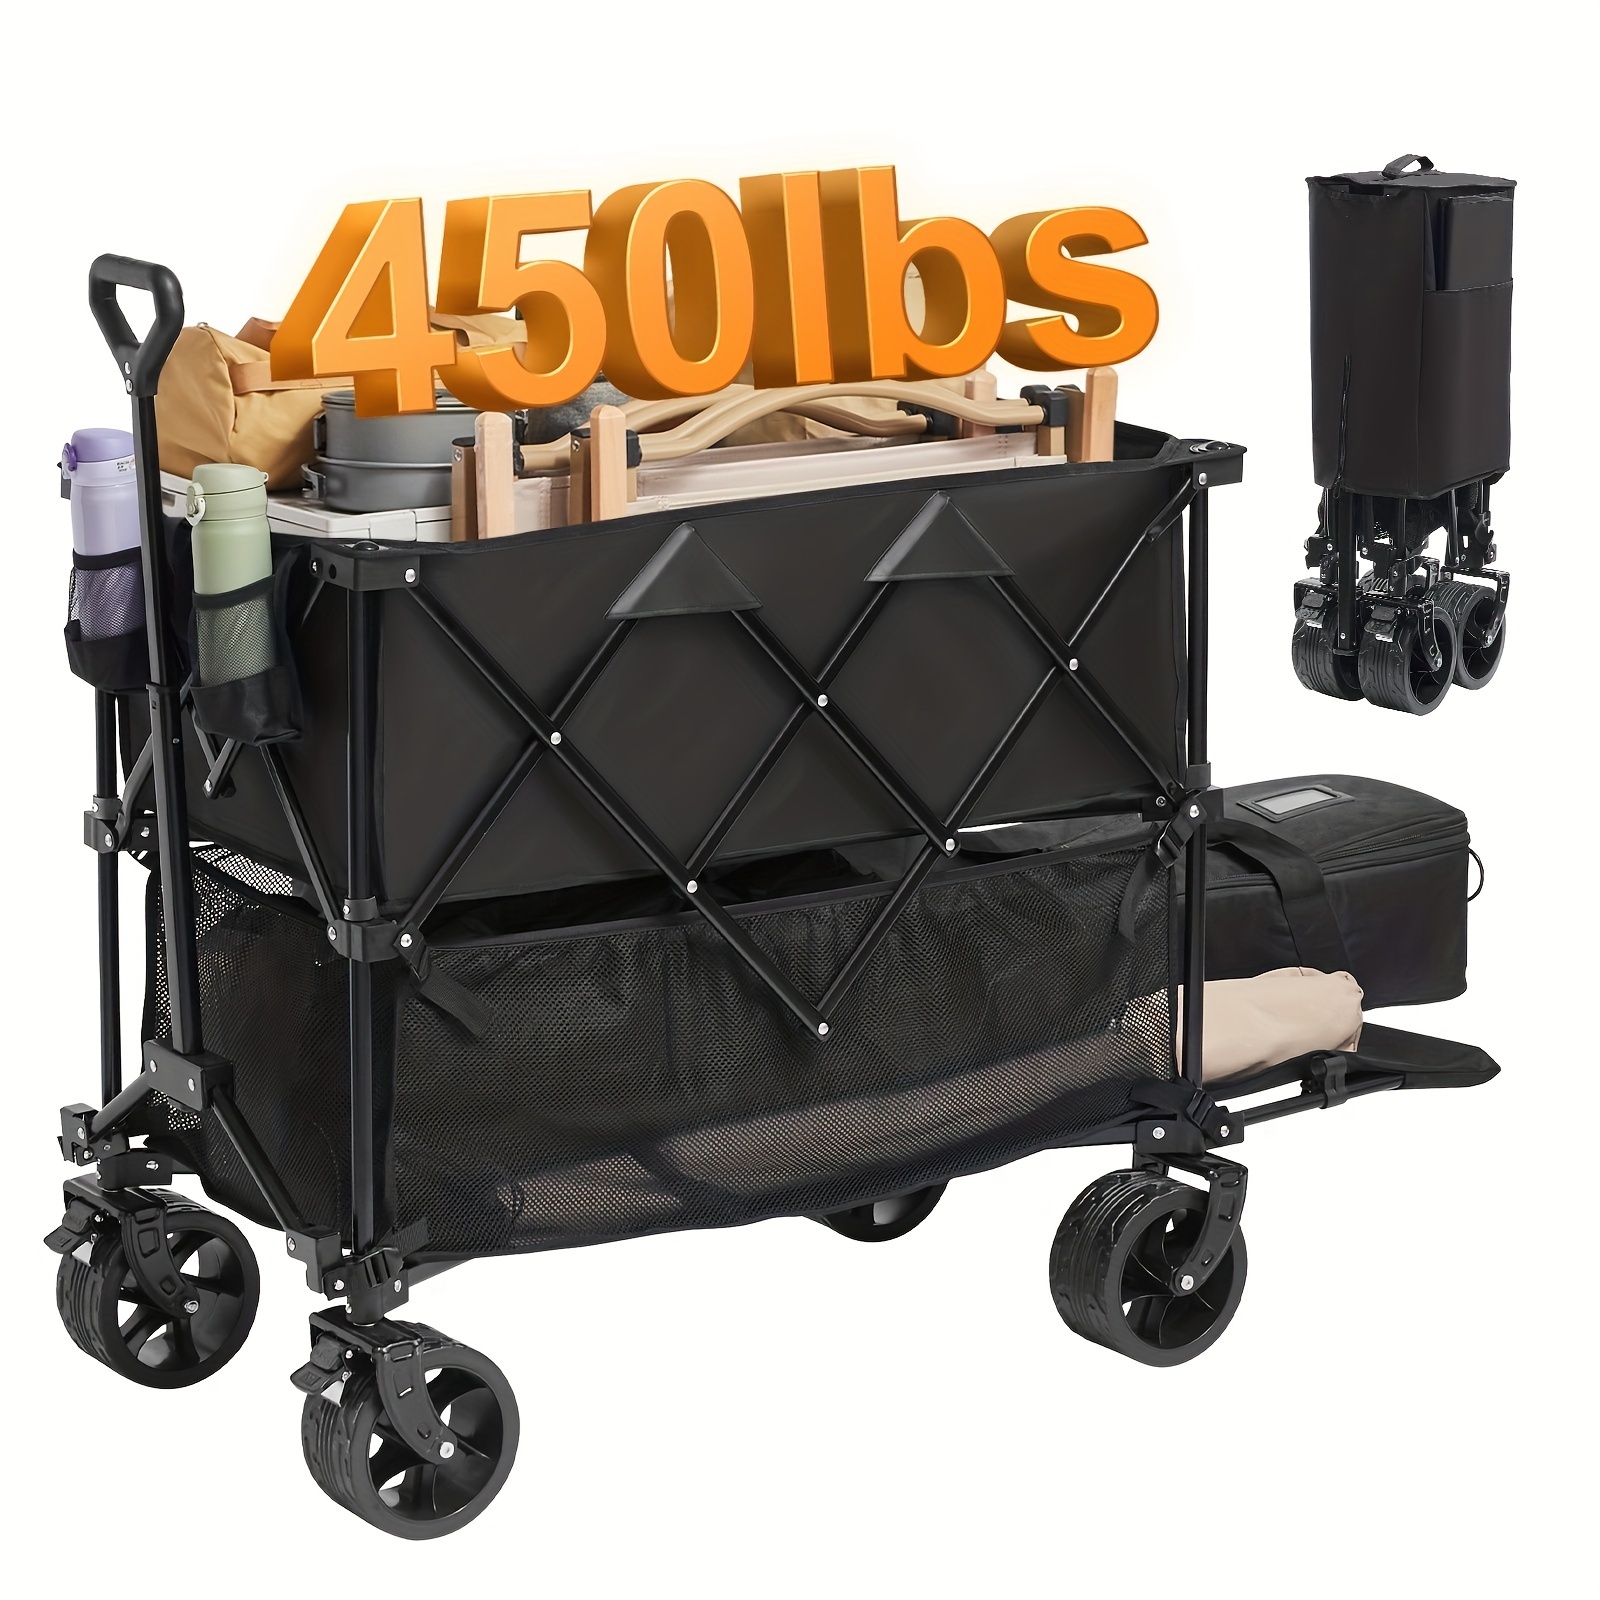 

Foldable Wagon, 400l Collapsible Wagon Cart With All-terrain Wheels, Heavy Duty Folding Wagon Cart 450 Lbs Weight Capacity For Camping, Shopping, Garden, 52" Extra Long Extender